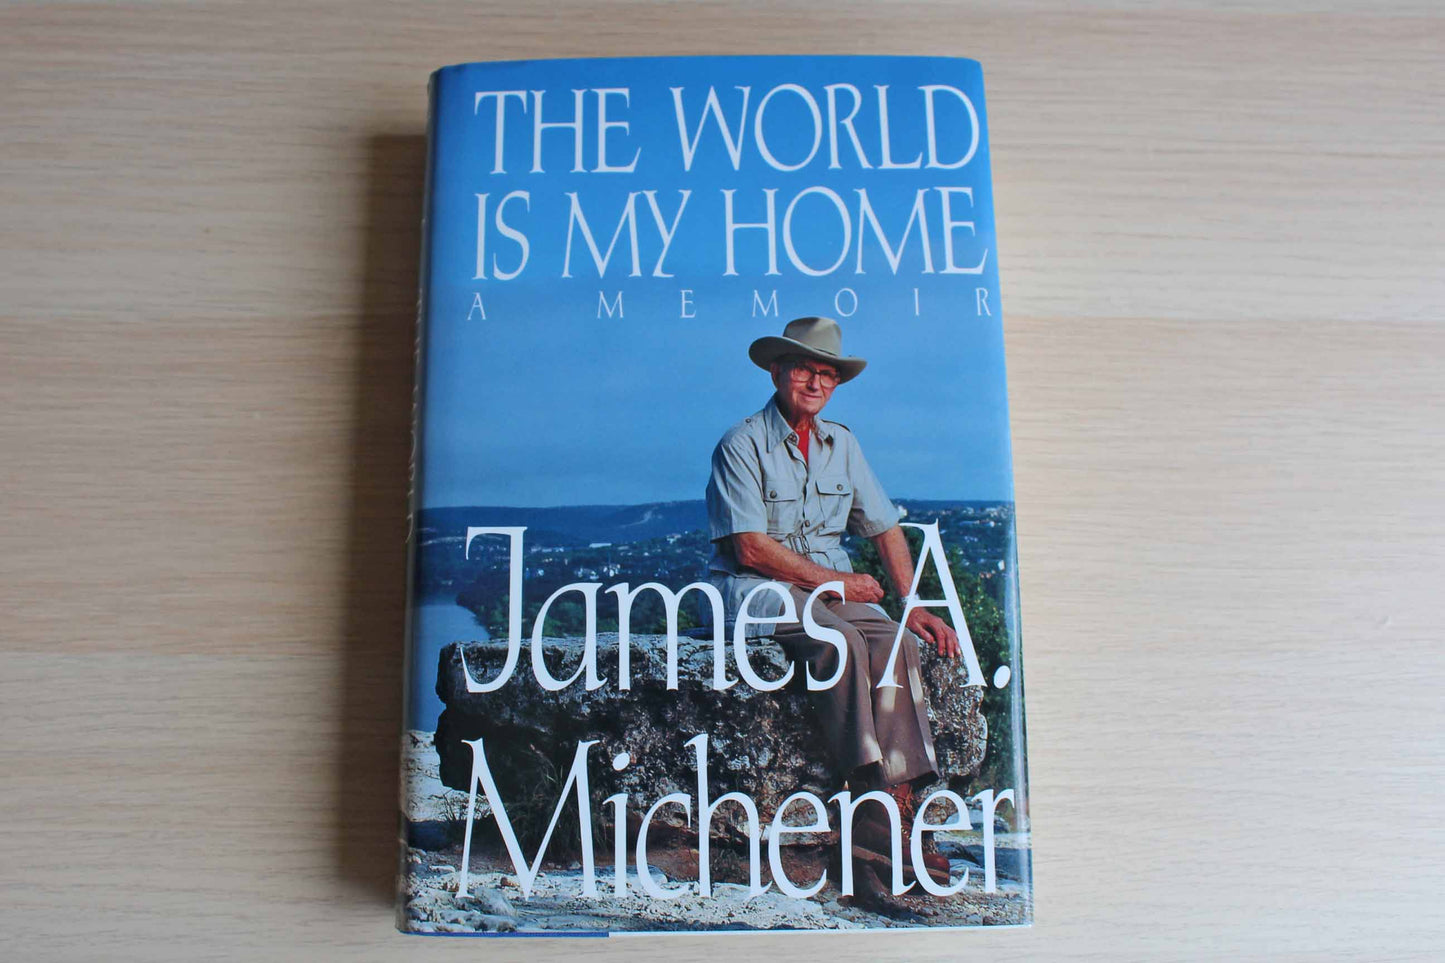 The World is My Home:  A Memoir by James Michener